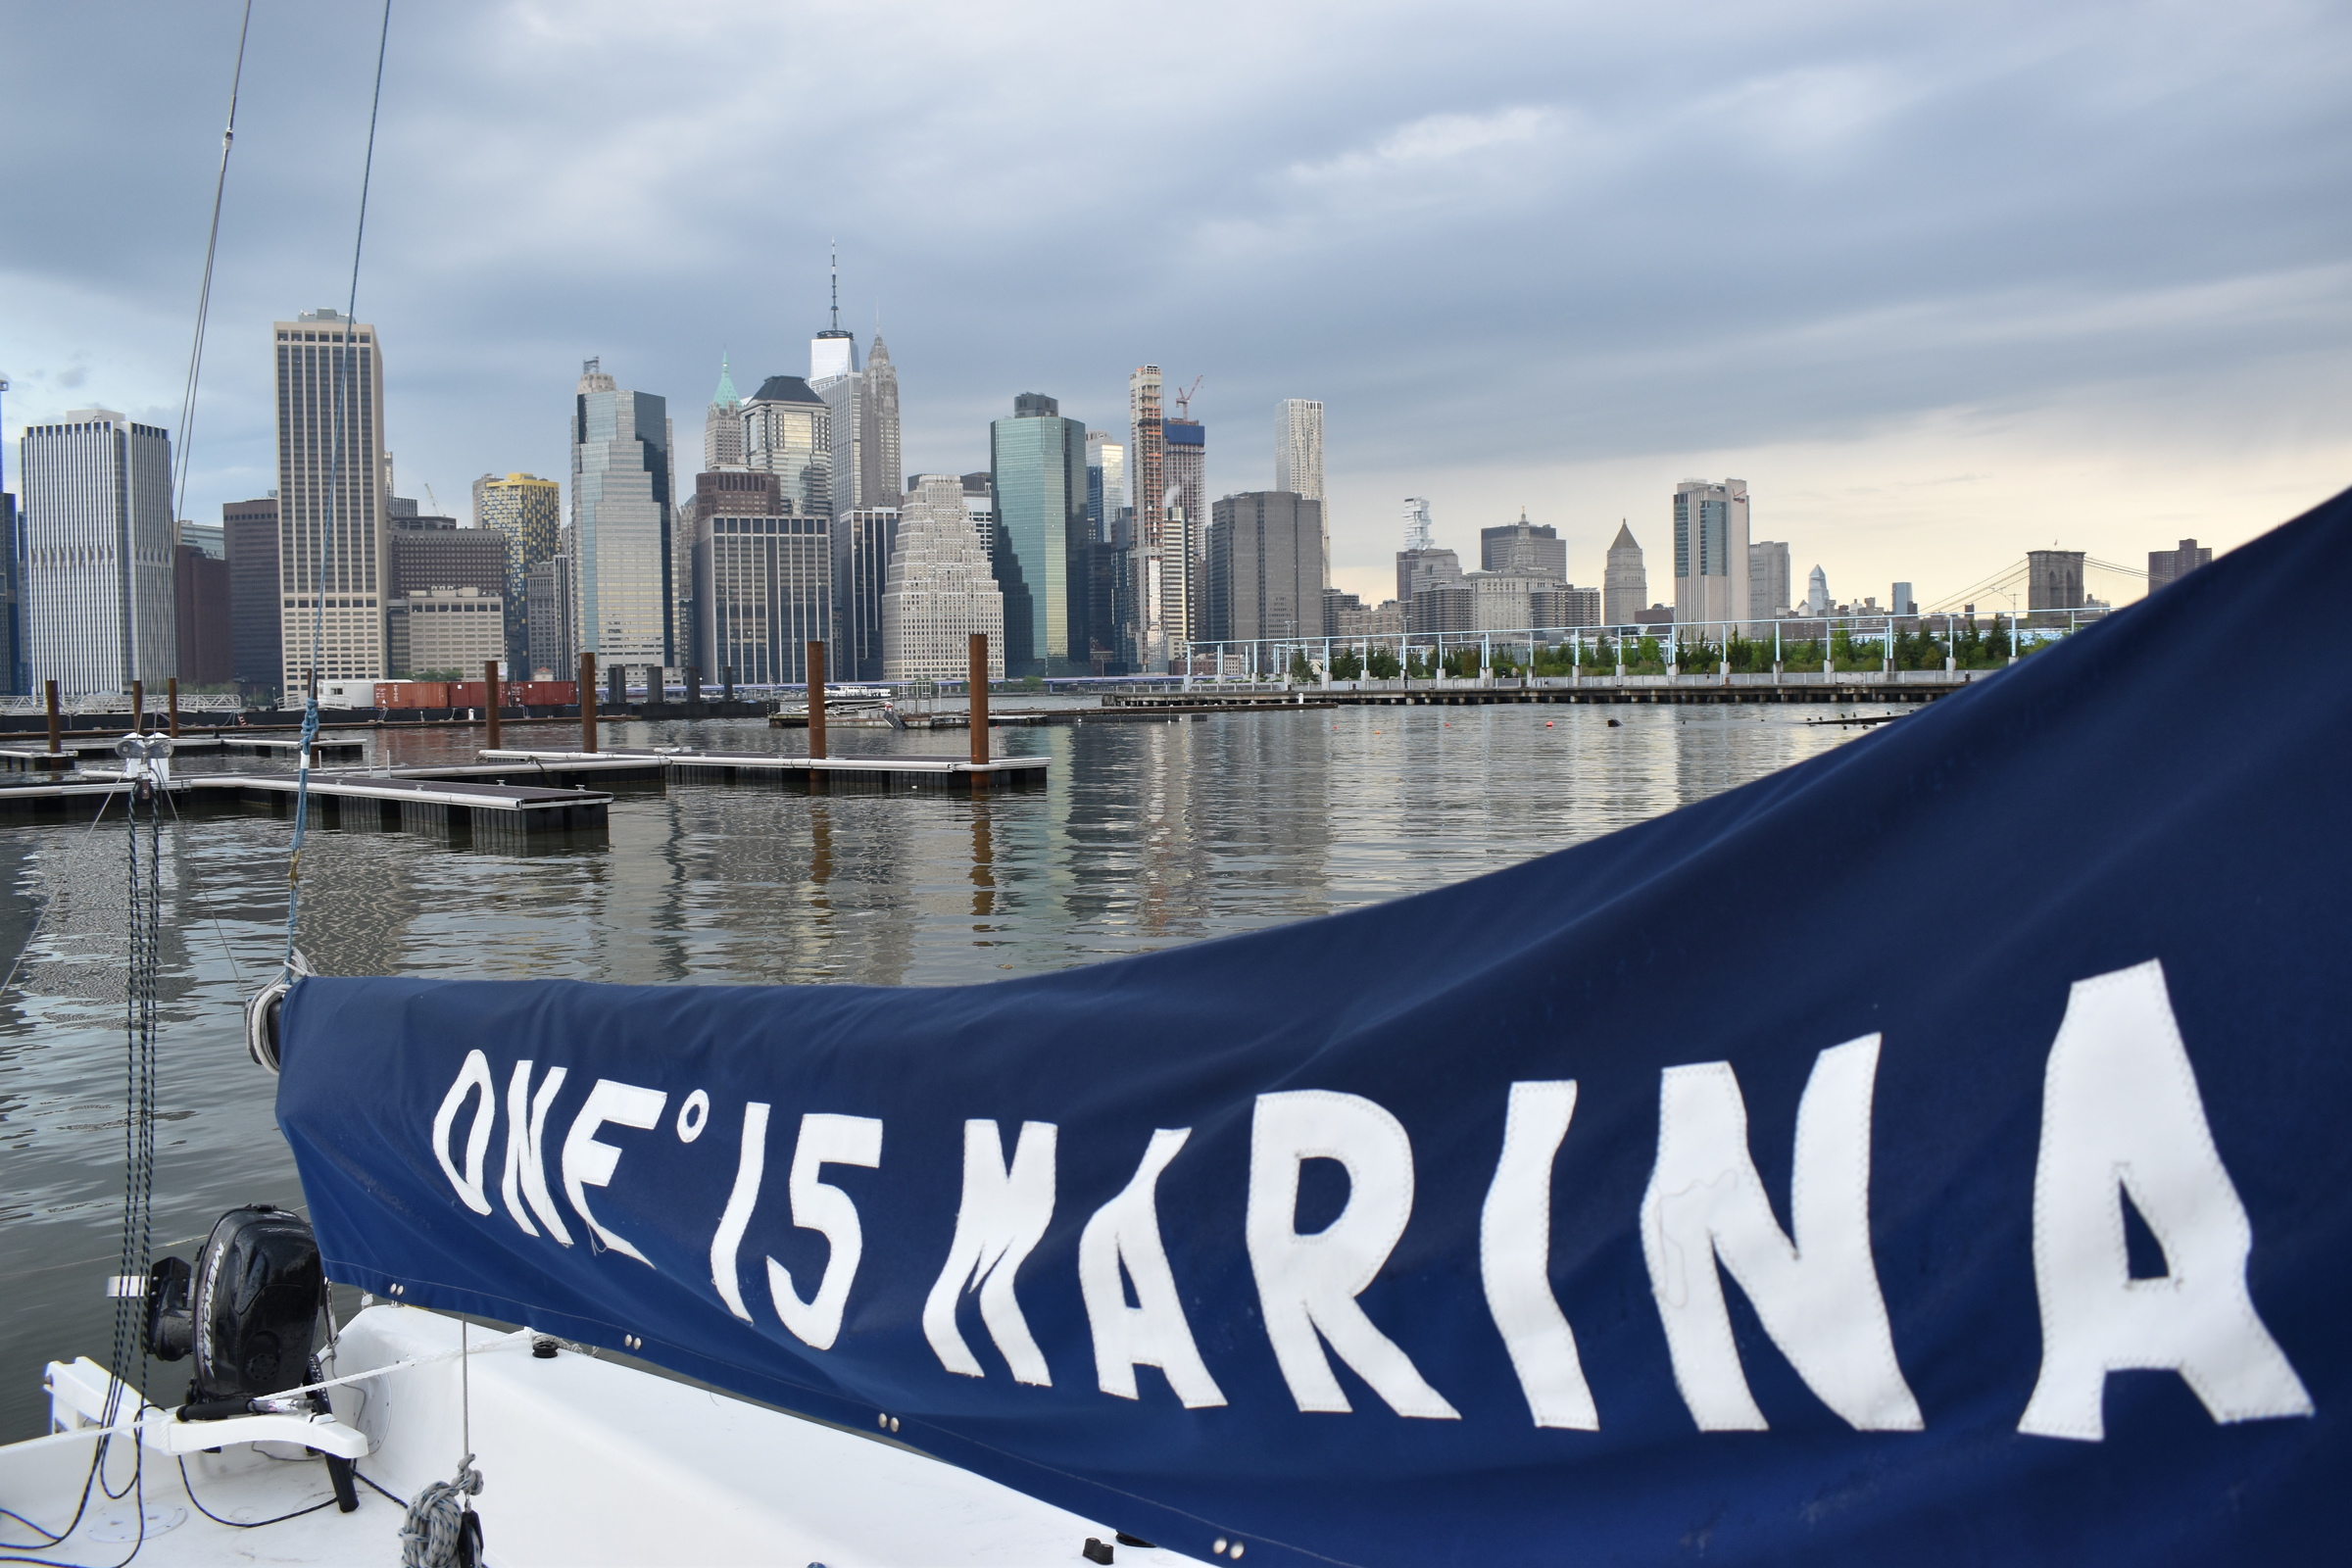 Boaters can inquire about renting space at the new ONE15 Brooklyn Marina as Macy's gears up for its 43rd annual fireworks display next week.